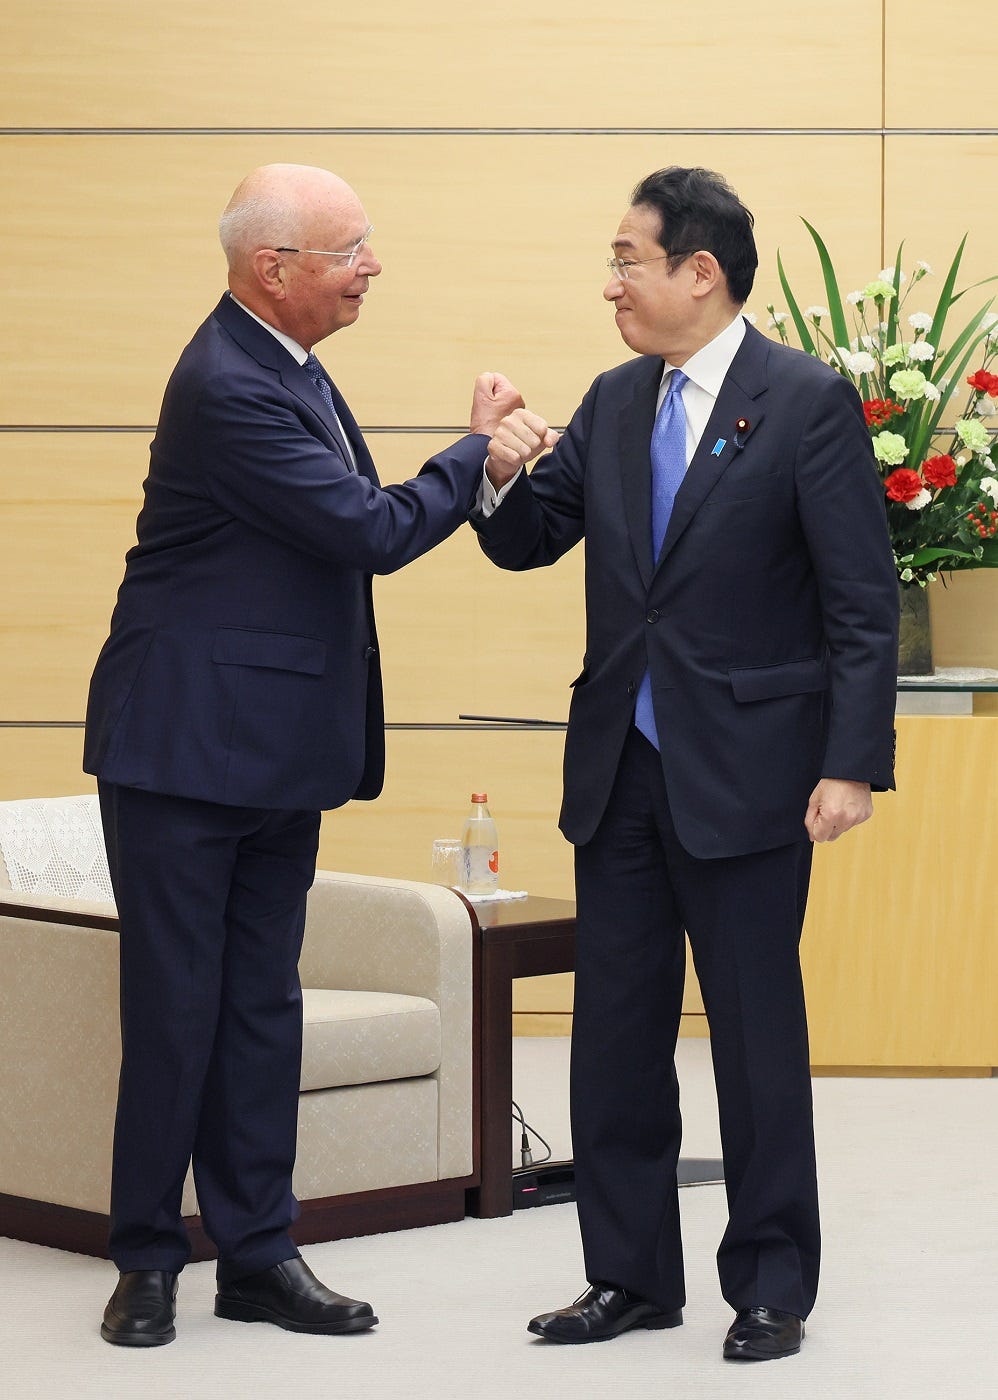 Courtesy Call from WEF Chairman Schwab (The Prime Minister in Action) |  Prime Minister of Japan and His Cabinet